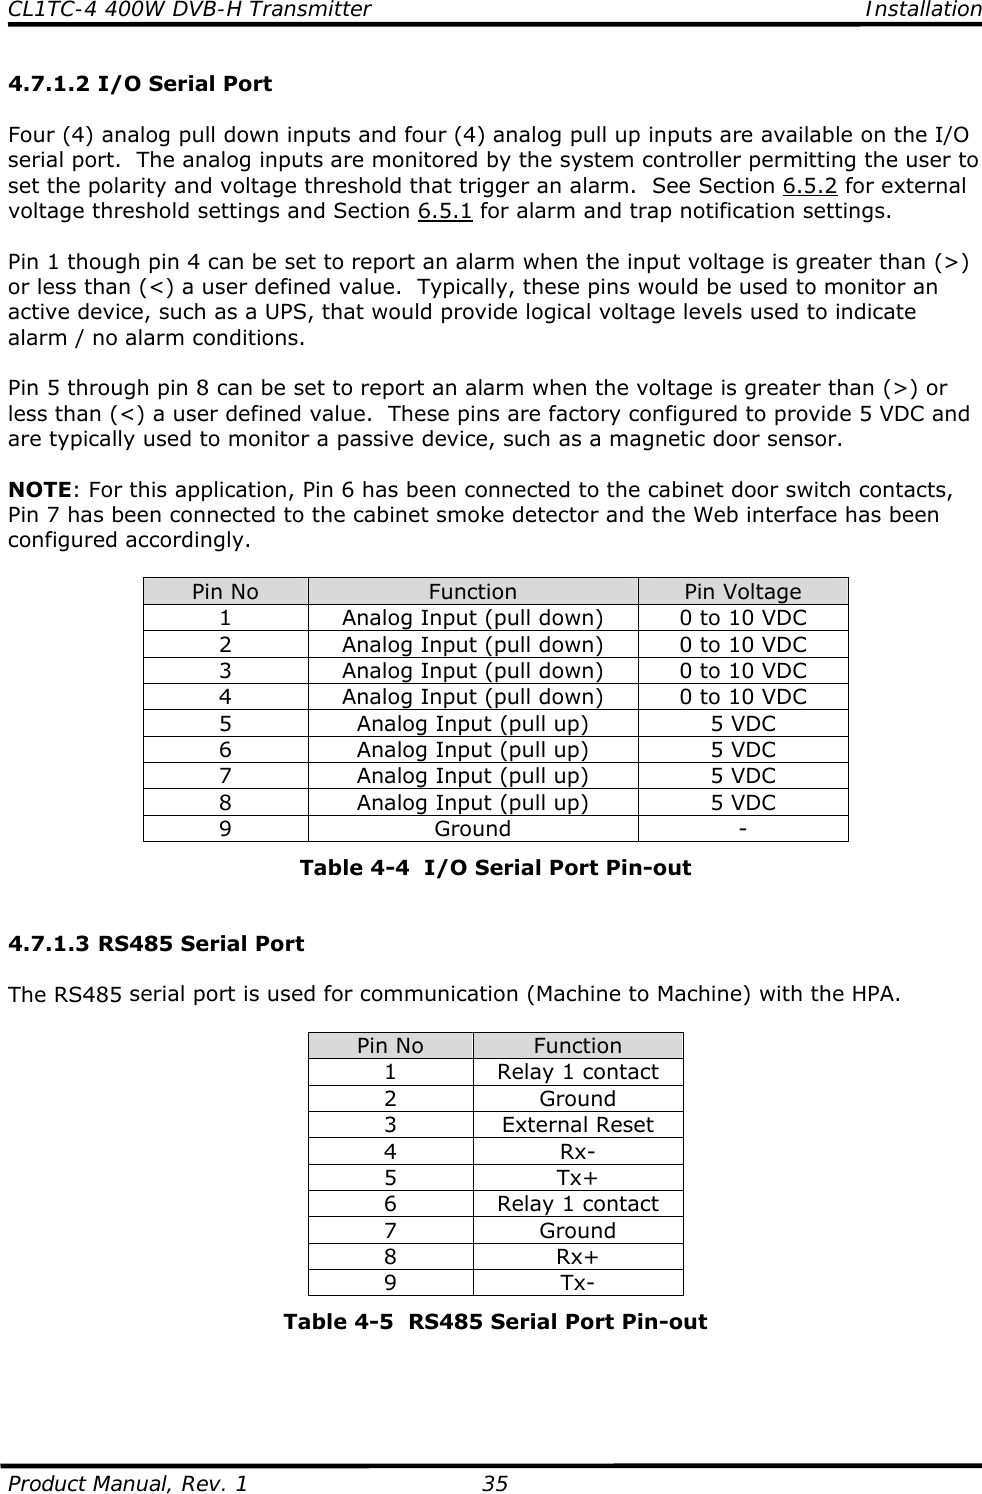 CL1TC-4 400W DVB-H Transmitter    Installation  Product Manual, Rev. 1  35 4.7.1.2 I/O Serial Port  Four (4) analog pull down inputs and four (4) analog pull up inputs are available on the I/O serial port.  The analog inputs are monitored by the system controller permitting the user to set the polarity and voltage threshold that trigger an alarm.  See Section 6.5.2 for external voltage threshold settings and Section 6.5.1 for alarm and trap notification settings.  Pin 1 though pin 4 can be set to report an alarm when the input voltage is greater than (&gt;) or less than (&lt;) a user defined value.  Typically, these pins would be used to monitor an active device, such as a UPS, that would provide logical voltage levels used to indicate alarm / no alarm conditions.  Pin 5 through pin 8 can be set to report an alarm when the voltage is greater than (&gt;) or less than (&lt;) a user defined value.  These pins are factory configured to provide 5 VDC and are typically used to monitor a passive device, such as a magnetic door sensor.  NOTE: For this application, Pin 6 has been connected to the cabinet door switch contacts, Pin 7 has been connected to the cabinet smoke detector and the Web interface has been configured accordingly.  Pin No  Function  Pin Voltage 1  Analog Input (pull down)  0 to 10 VDC 2  Analog Input (pull down)  0 to 10 VDC 3  Analog Input (pull down)  0 to 10 VDC 4  Analog Input (pull down)  0 to 10 VDC 5  Analog Input (pull up)  5 VDC 6  Analog Input (pull up)  5 VDC 7  Analog Input (pull up)  5 VDC 8  Analog Input (pull up)  5 VDC 9 Ground  - Table 4-4  I/O Serial Port Pin-out   4.7.1.3 RS485 Serial Port  The RS485 serial port is used for communication (Machine to Machine) with the HPA.  Pin No  Function 1  Relay 1 contact 2 Ground 3 External Reset 4 Rx- 5 Tx+ 6  Relay 1 contact 7 Ground 8 Rx+ 9 Tx- Table 4-5  RS485 Serial Port Pin-out     